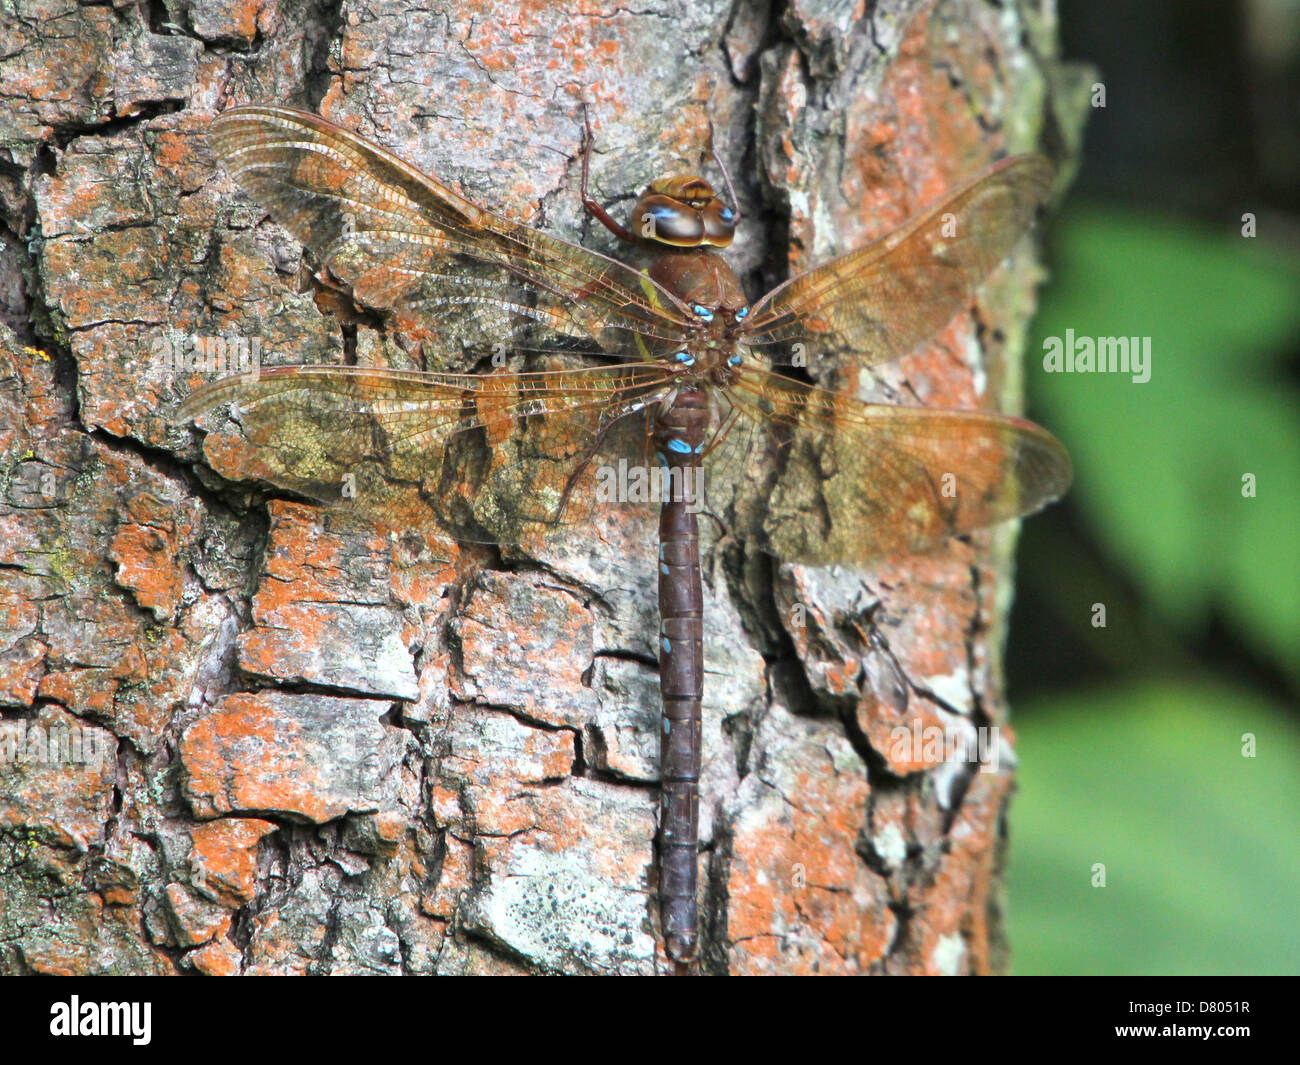 Close-up of a the large European Brown Hawker (Aeshna grandis) dragonfly Stock Photo